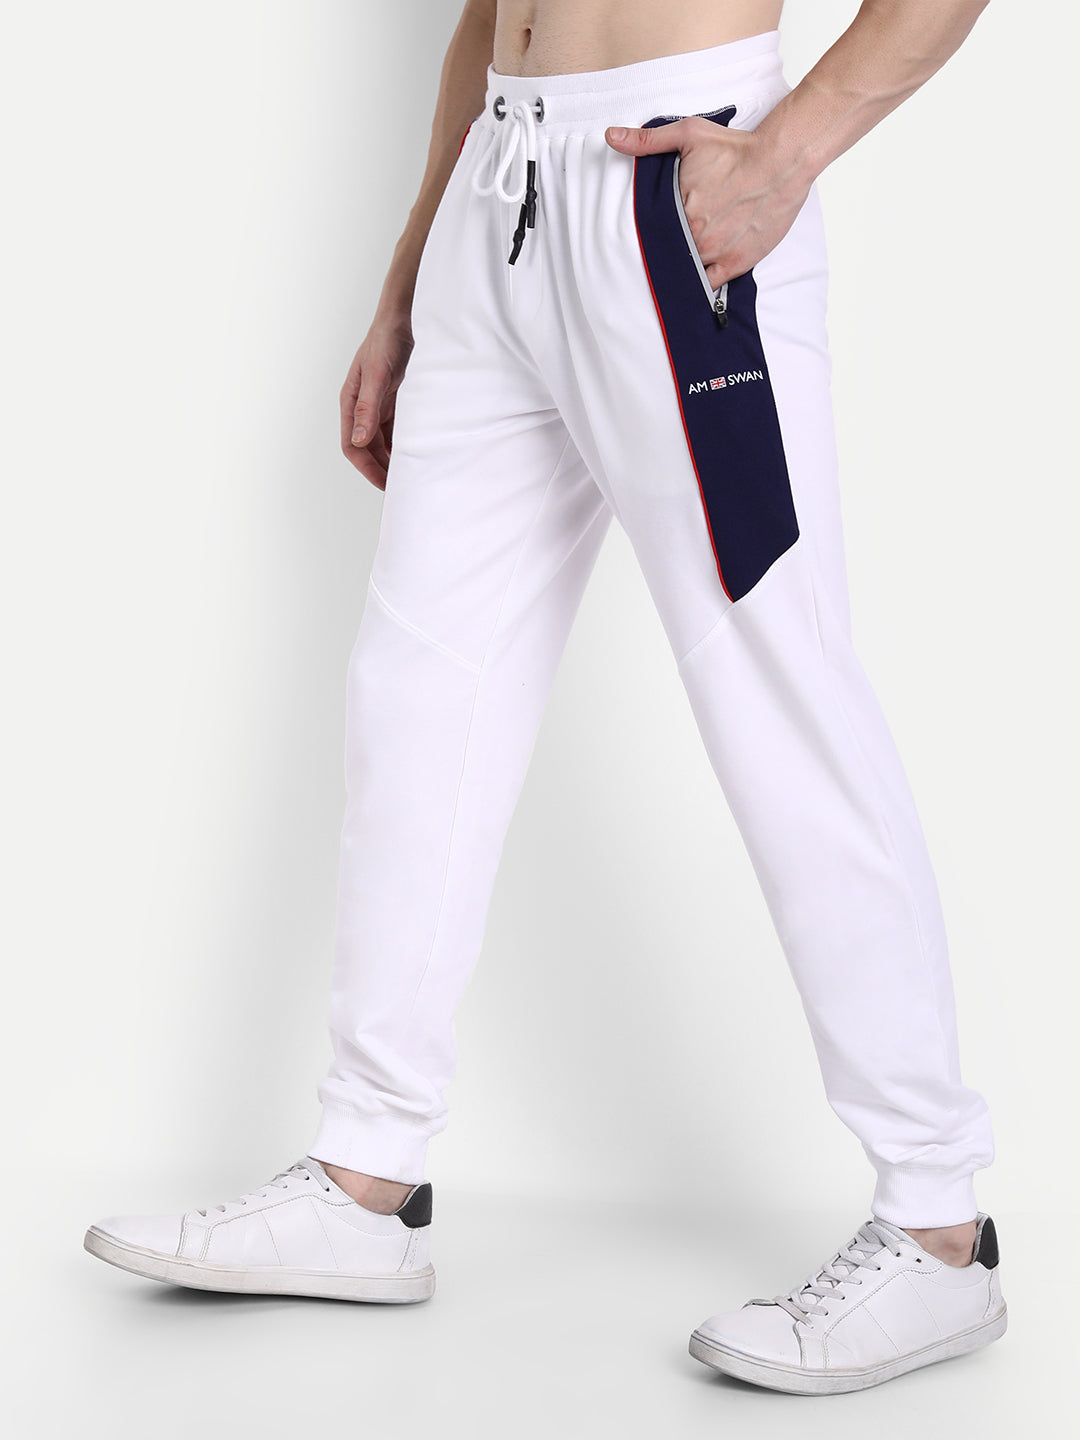 Men's Cotton Rich Lycra with Contrast Pannel Printed Track Pants